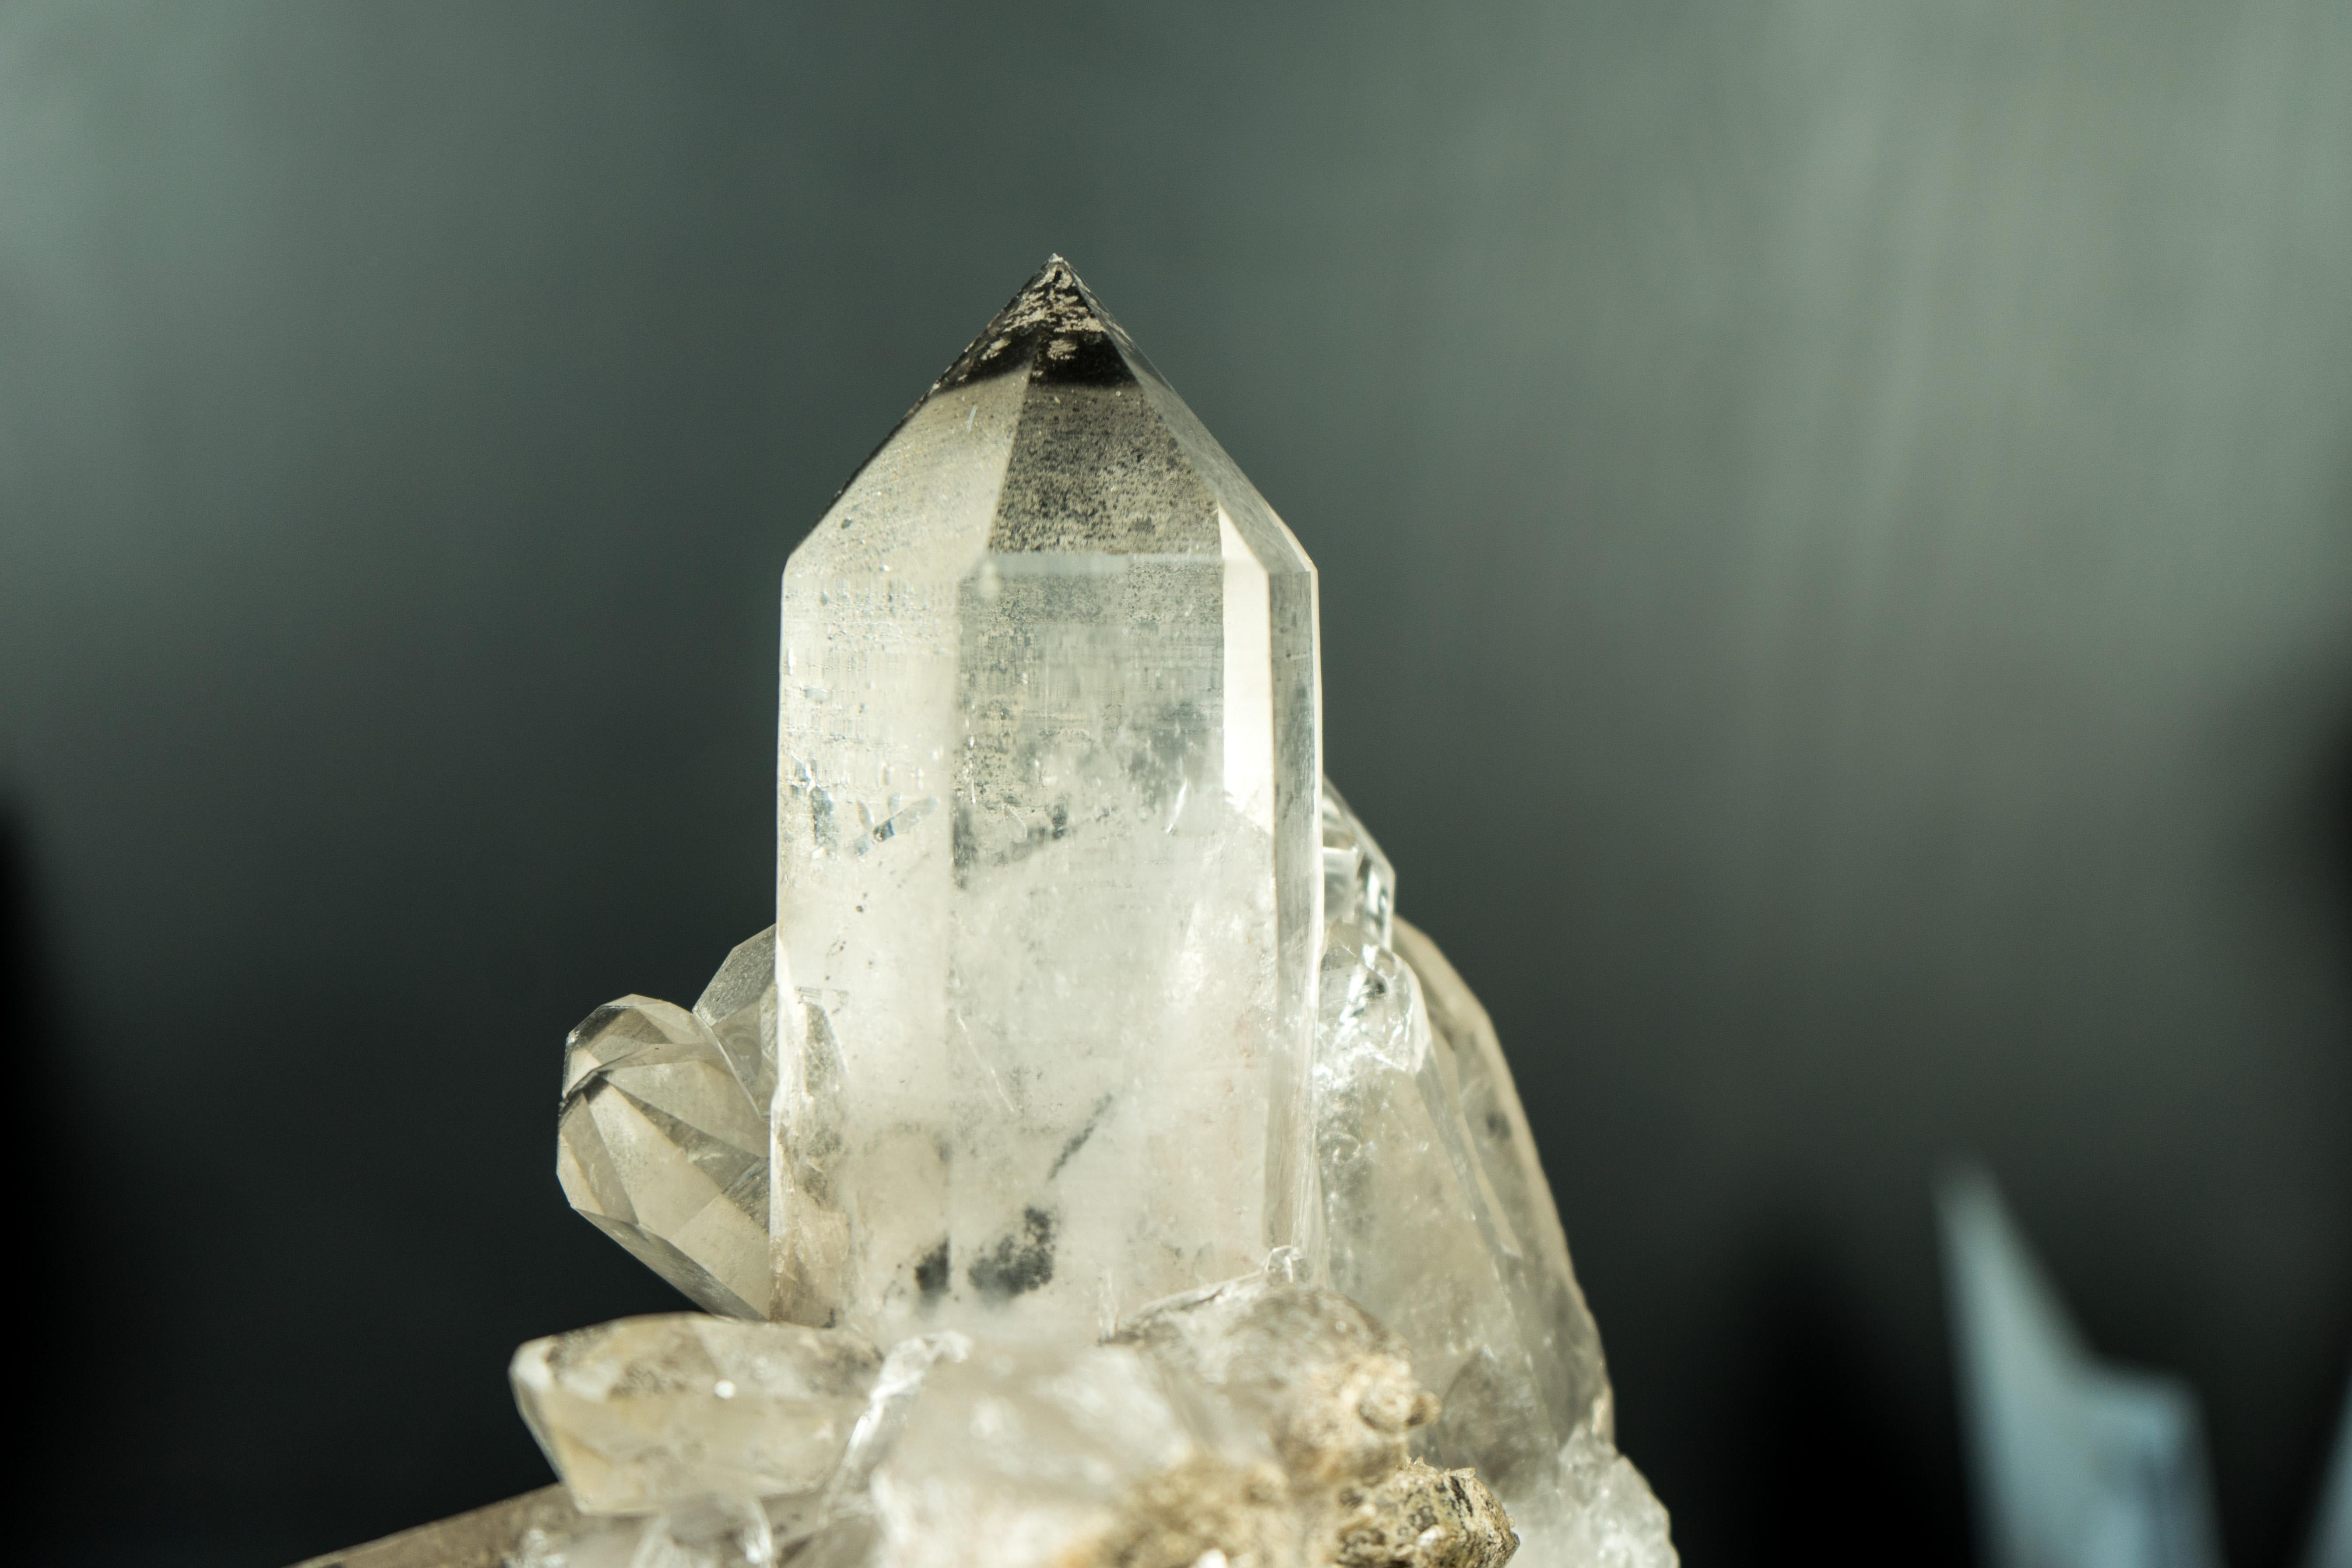 Gallery Grade Lemurian Crystal Cluster with Gray Dreamcoat Lithium Phantom For Sale 1